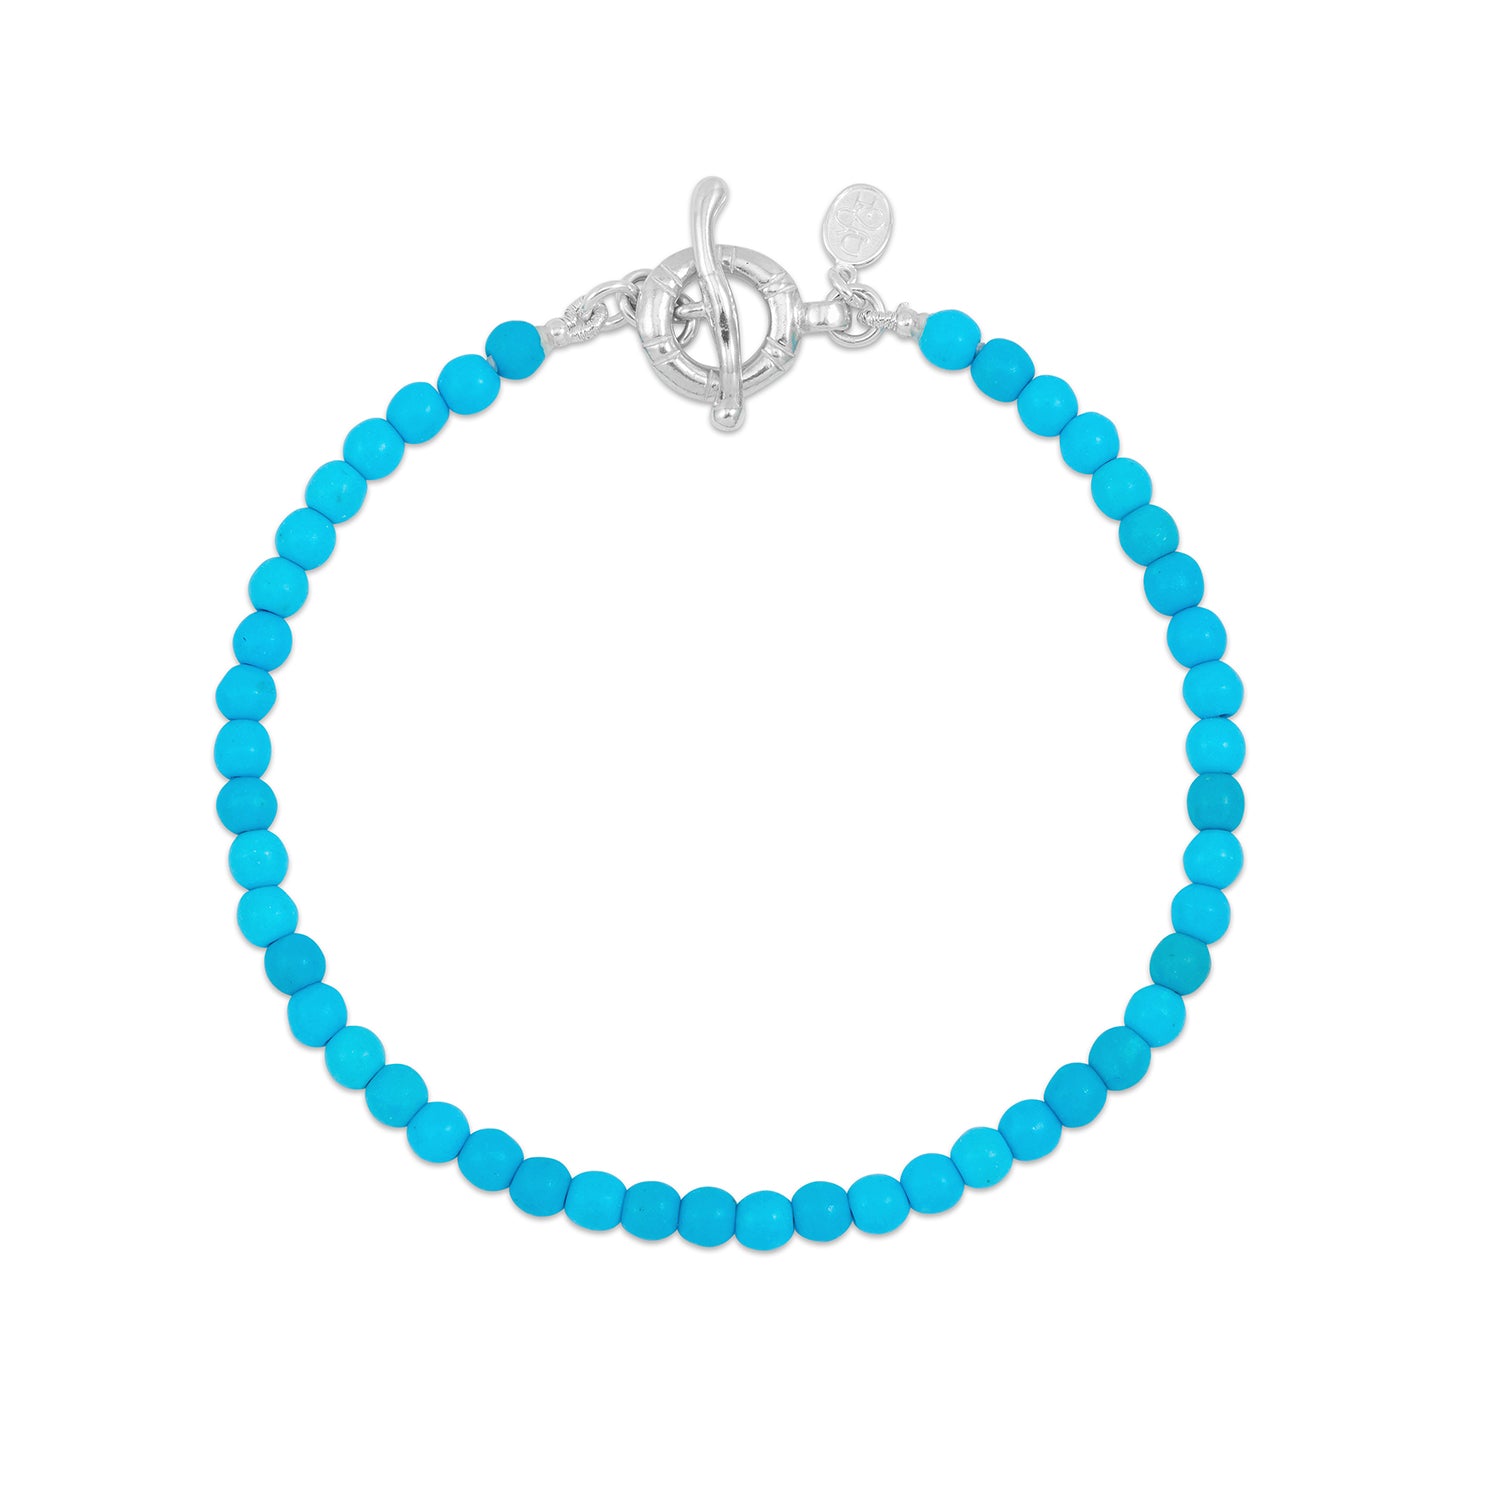 Turquoise Bead + Brown Leather with 925 Silver - Spirit Wrist Element